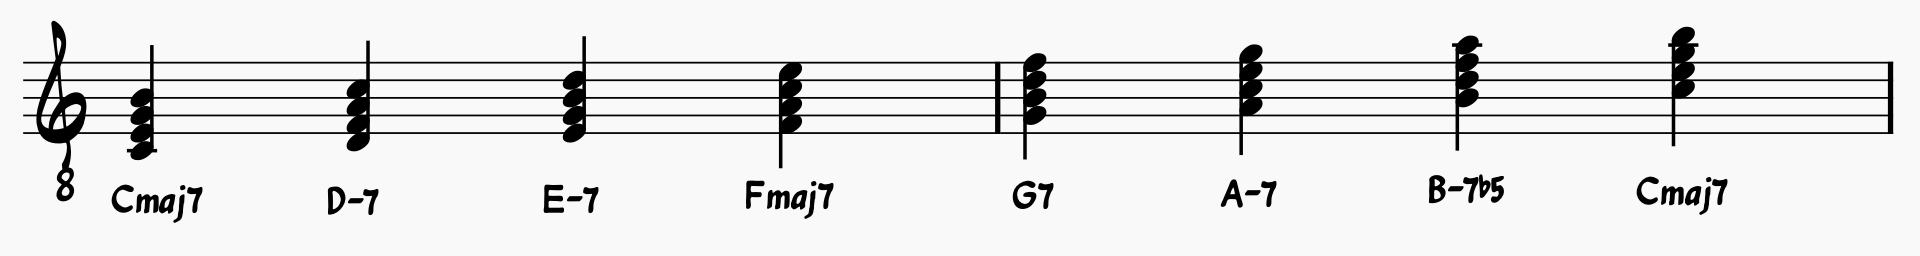 Diatonic chord scale in the key of C